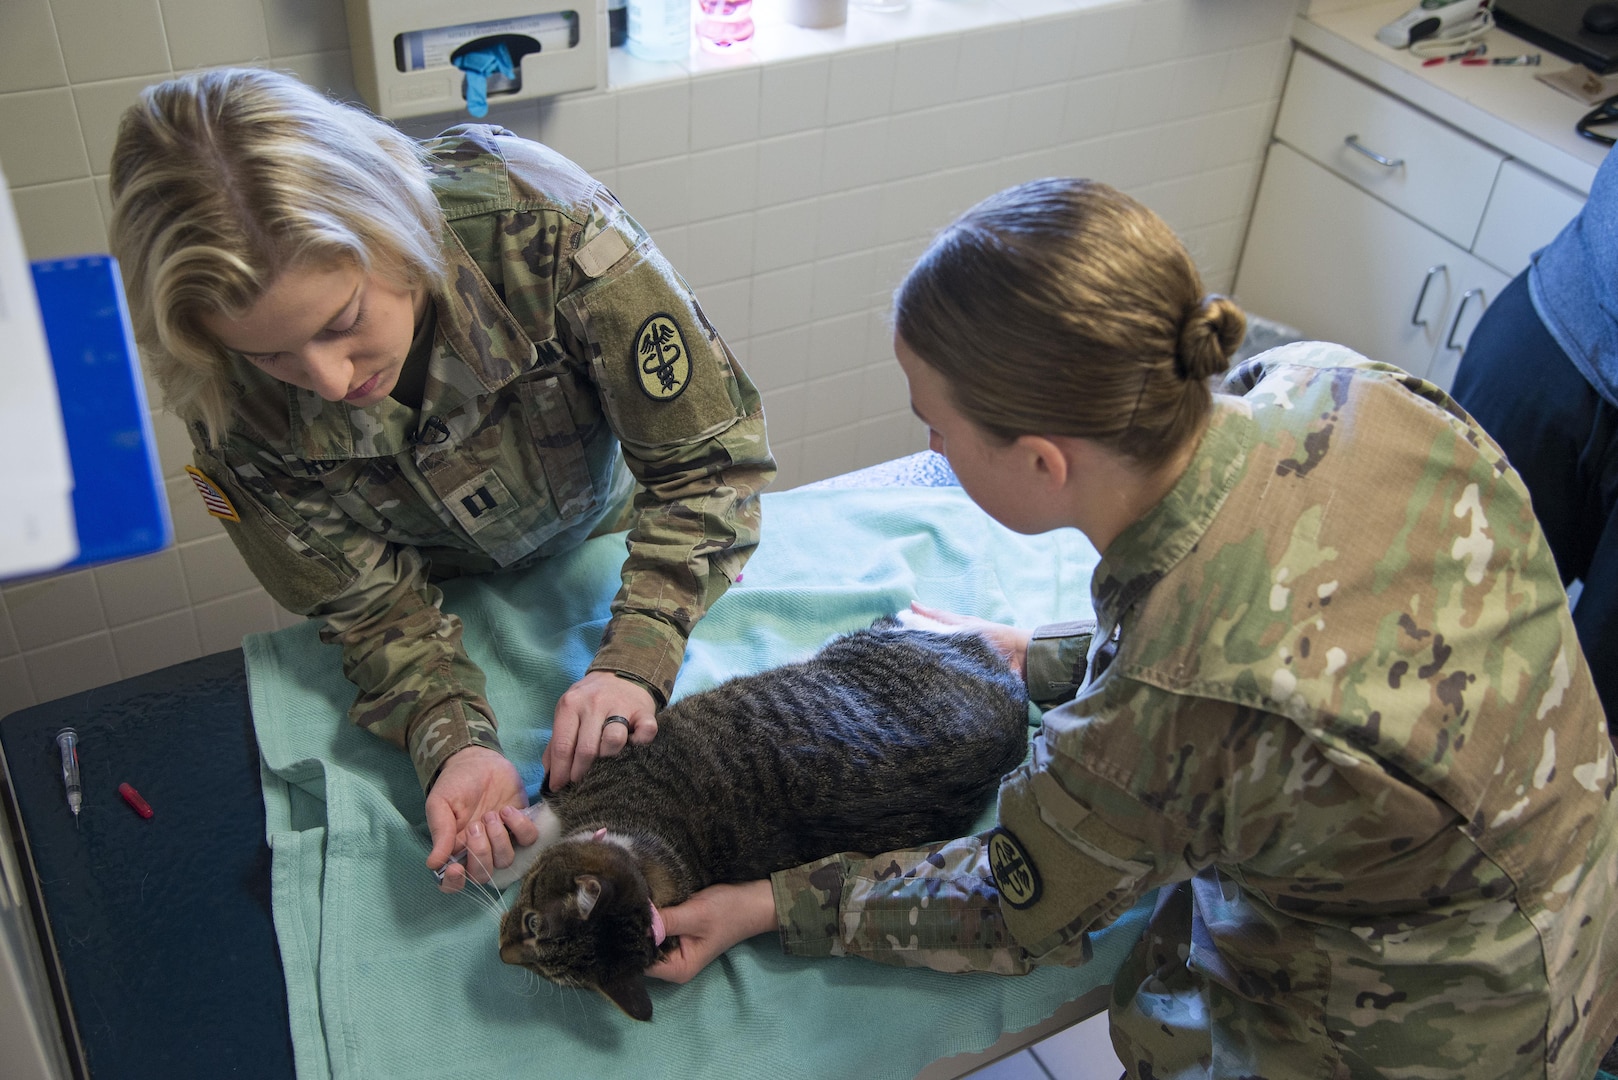 U.S. Army Captain Daniela Roberts, South Texas Branch Veterinarian Services veterinarian, administers a shot to a cat as Sgt. Chelsea Hanneman, South Texas Branch Veterinarian Services veterinarian technician, holds it during its annual checkup June 19, 2017, at Joint Base San Antonio-Randolph Veterinarian Clinic.  Military veterinarians ensure the strength of veterinary public health capabilities through veterinary medical and surgical care, food safety and defense, biomedical research and development.